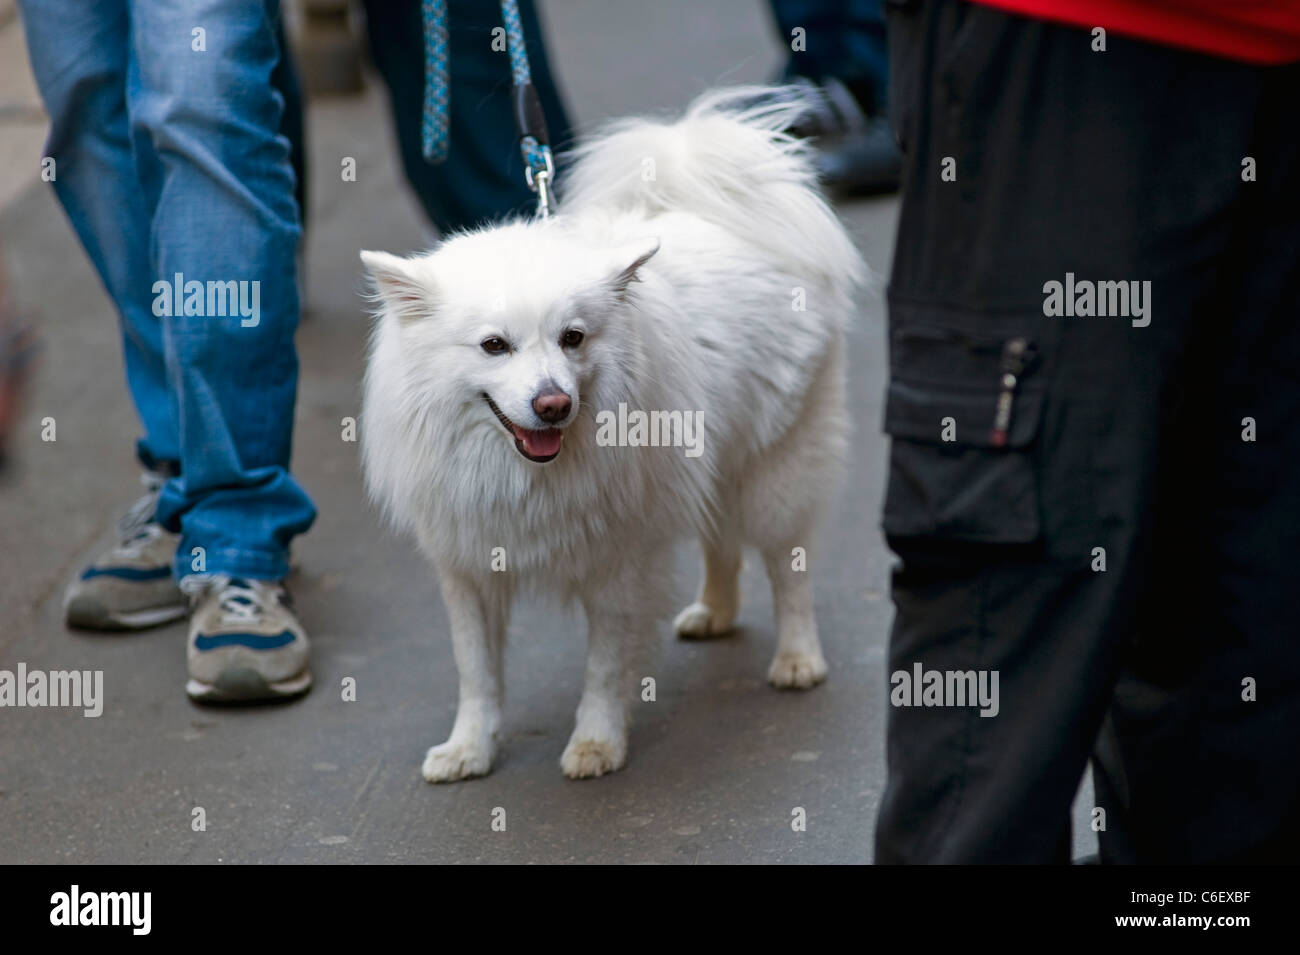 standard american eskimo dog on the streets of milan, italy Stock Photo